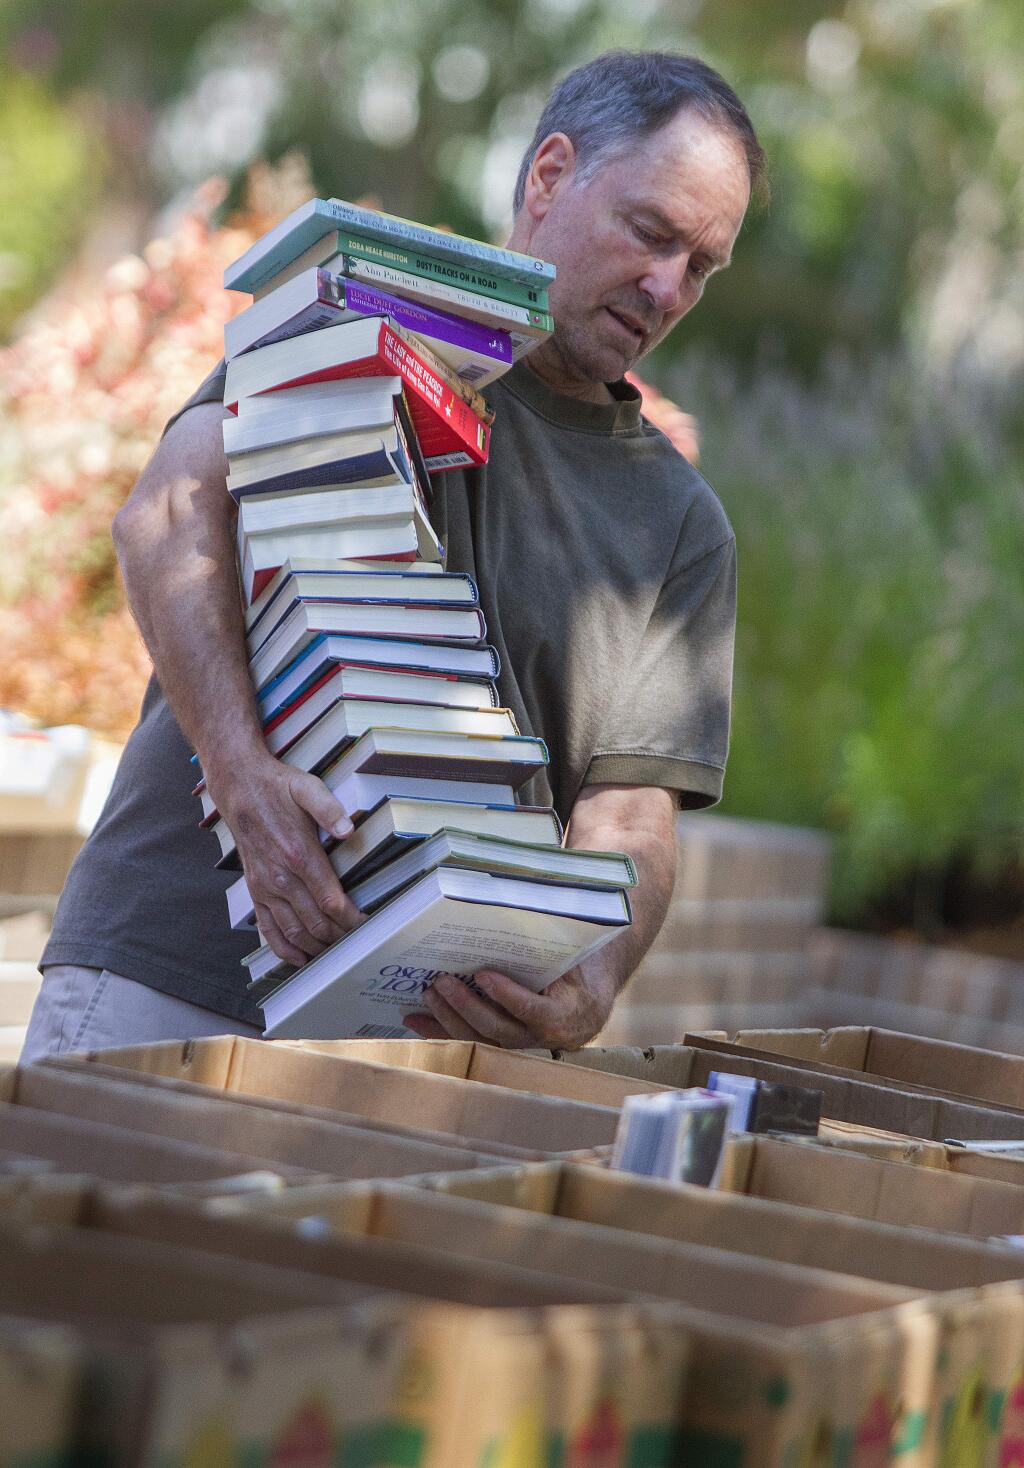 Robbi Pengelly/Index-TribuneA balancing actBrian Newick, a master of book balancing, has his hands full at the Friends of the Sonoma Valley Library's August book sale, last weekend at the Sonoma Valley Regional Library. The sale brought in almost $12,000. All book donations not sold (including those not put out for the sale) at the sale end up going to St. Vincent de Paul, so all donations get to someone.